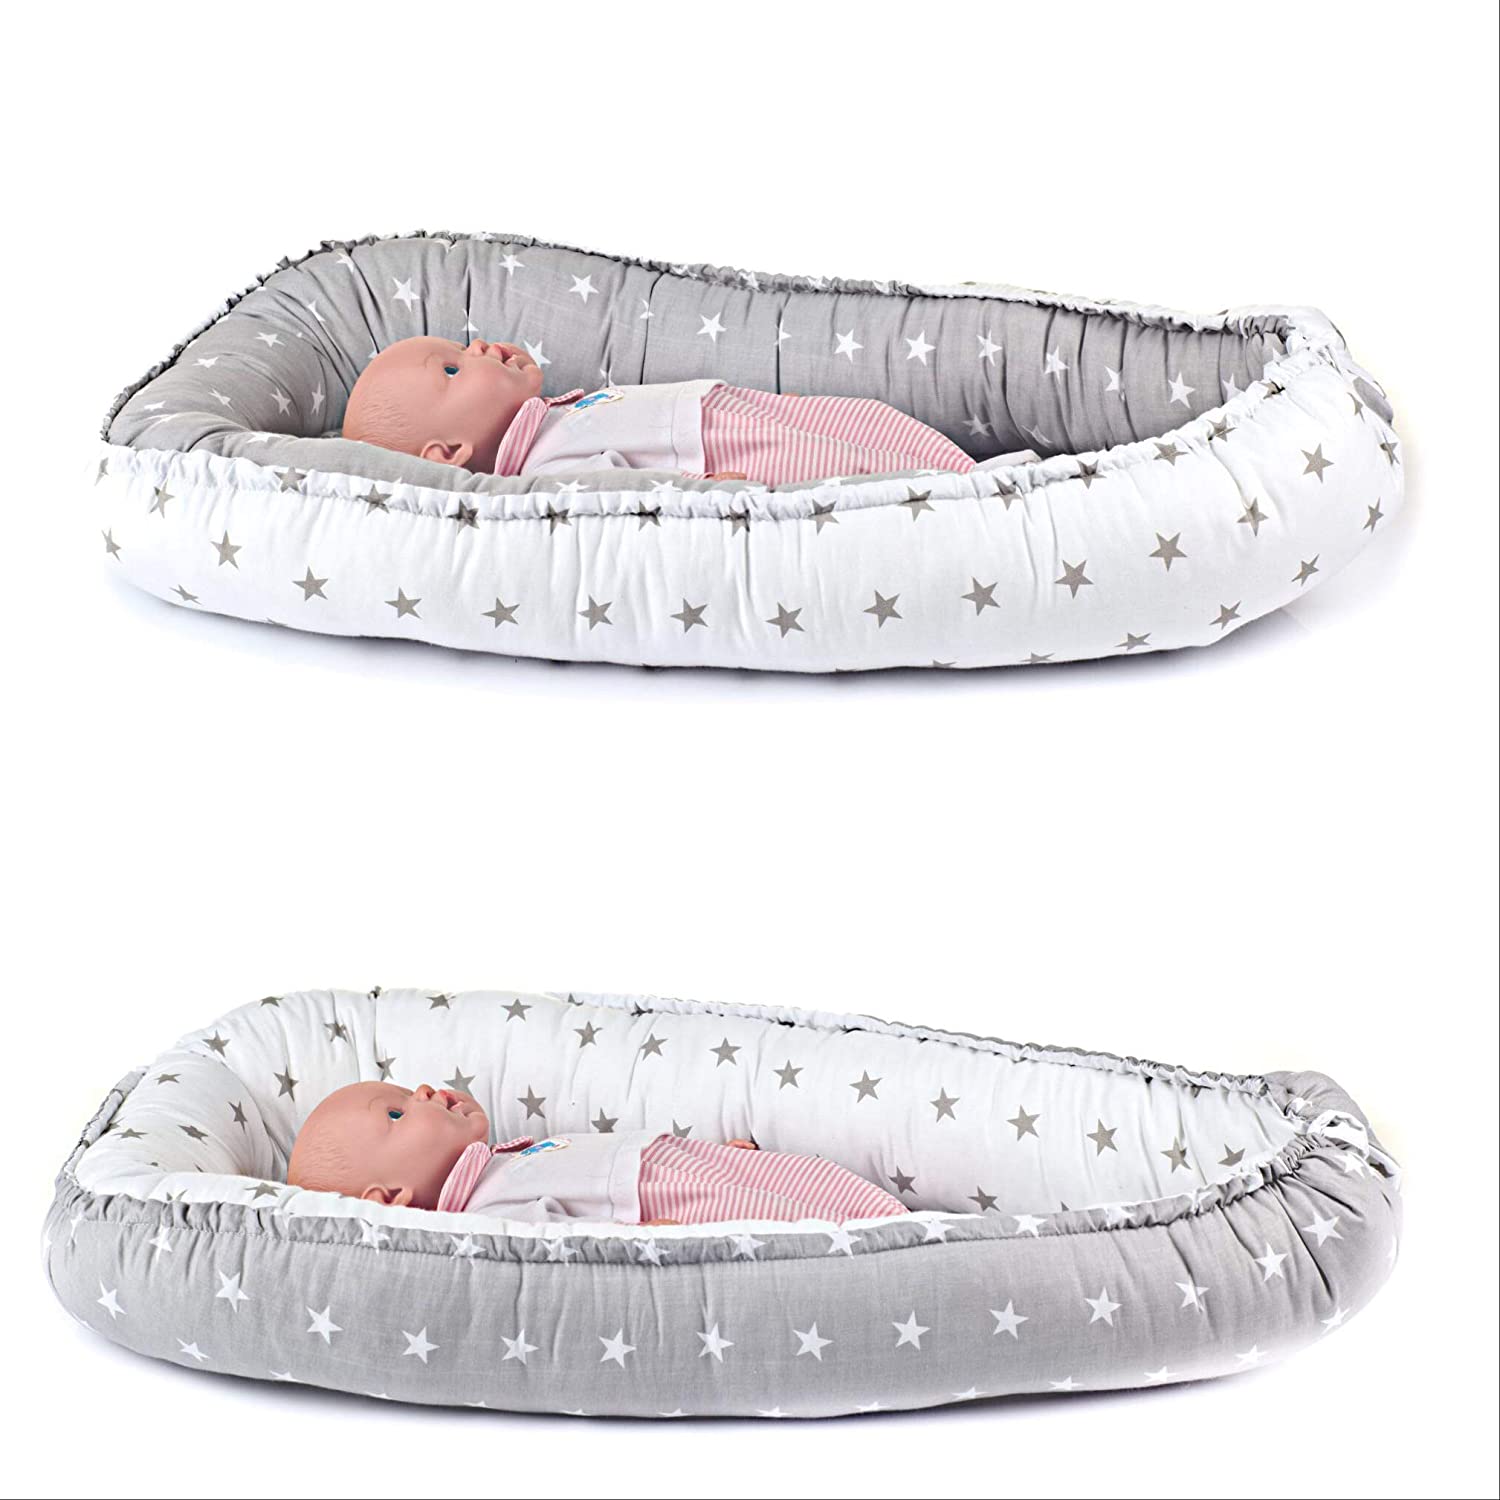 Coconut Cocoon Cot Cot Cosy Nest